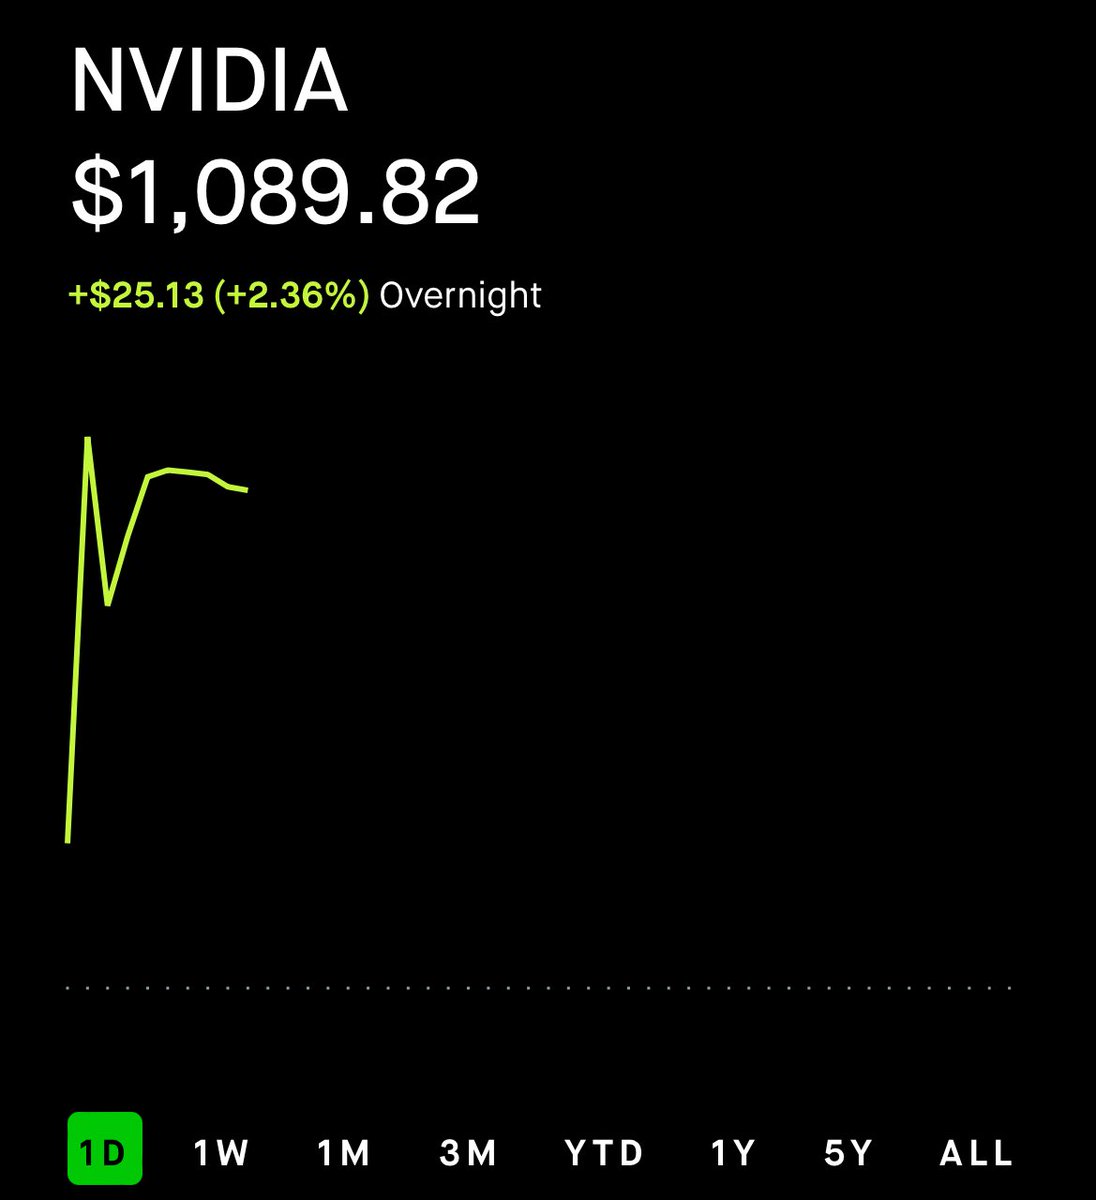 Of course $NVDA cutting its prices in #China to fend off #Huawei competition was going to be “bullish” 🤭